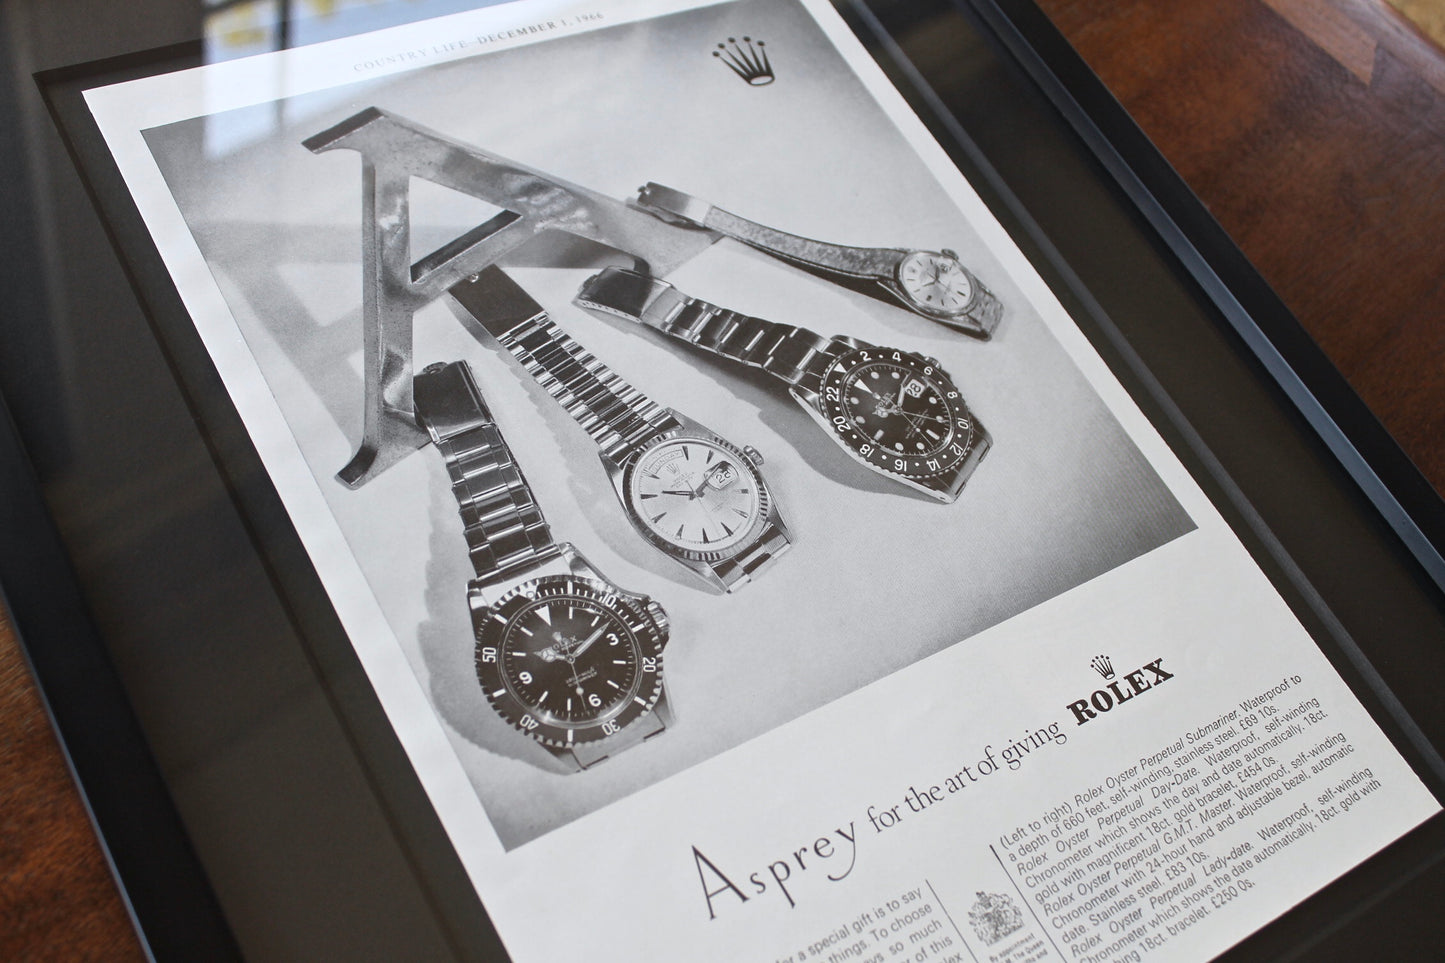 Rolex By Asprey 'The Art Of Giving'